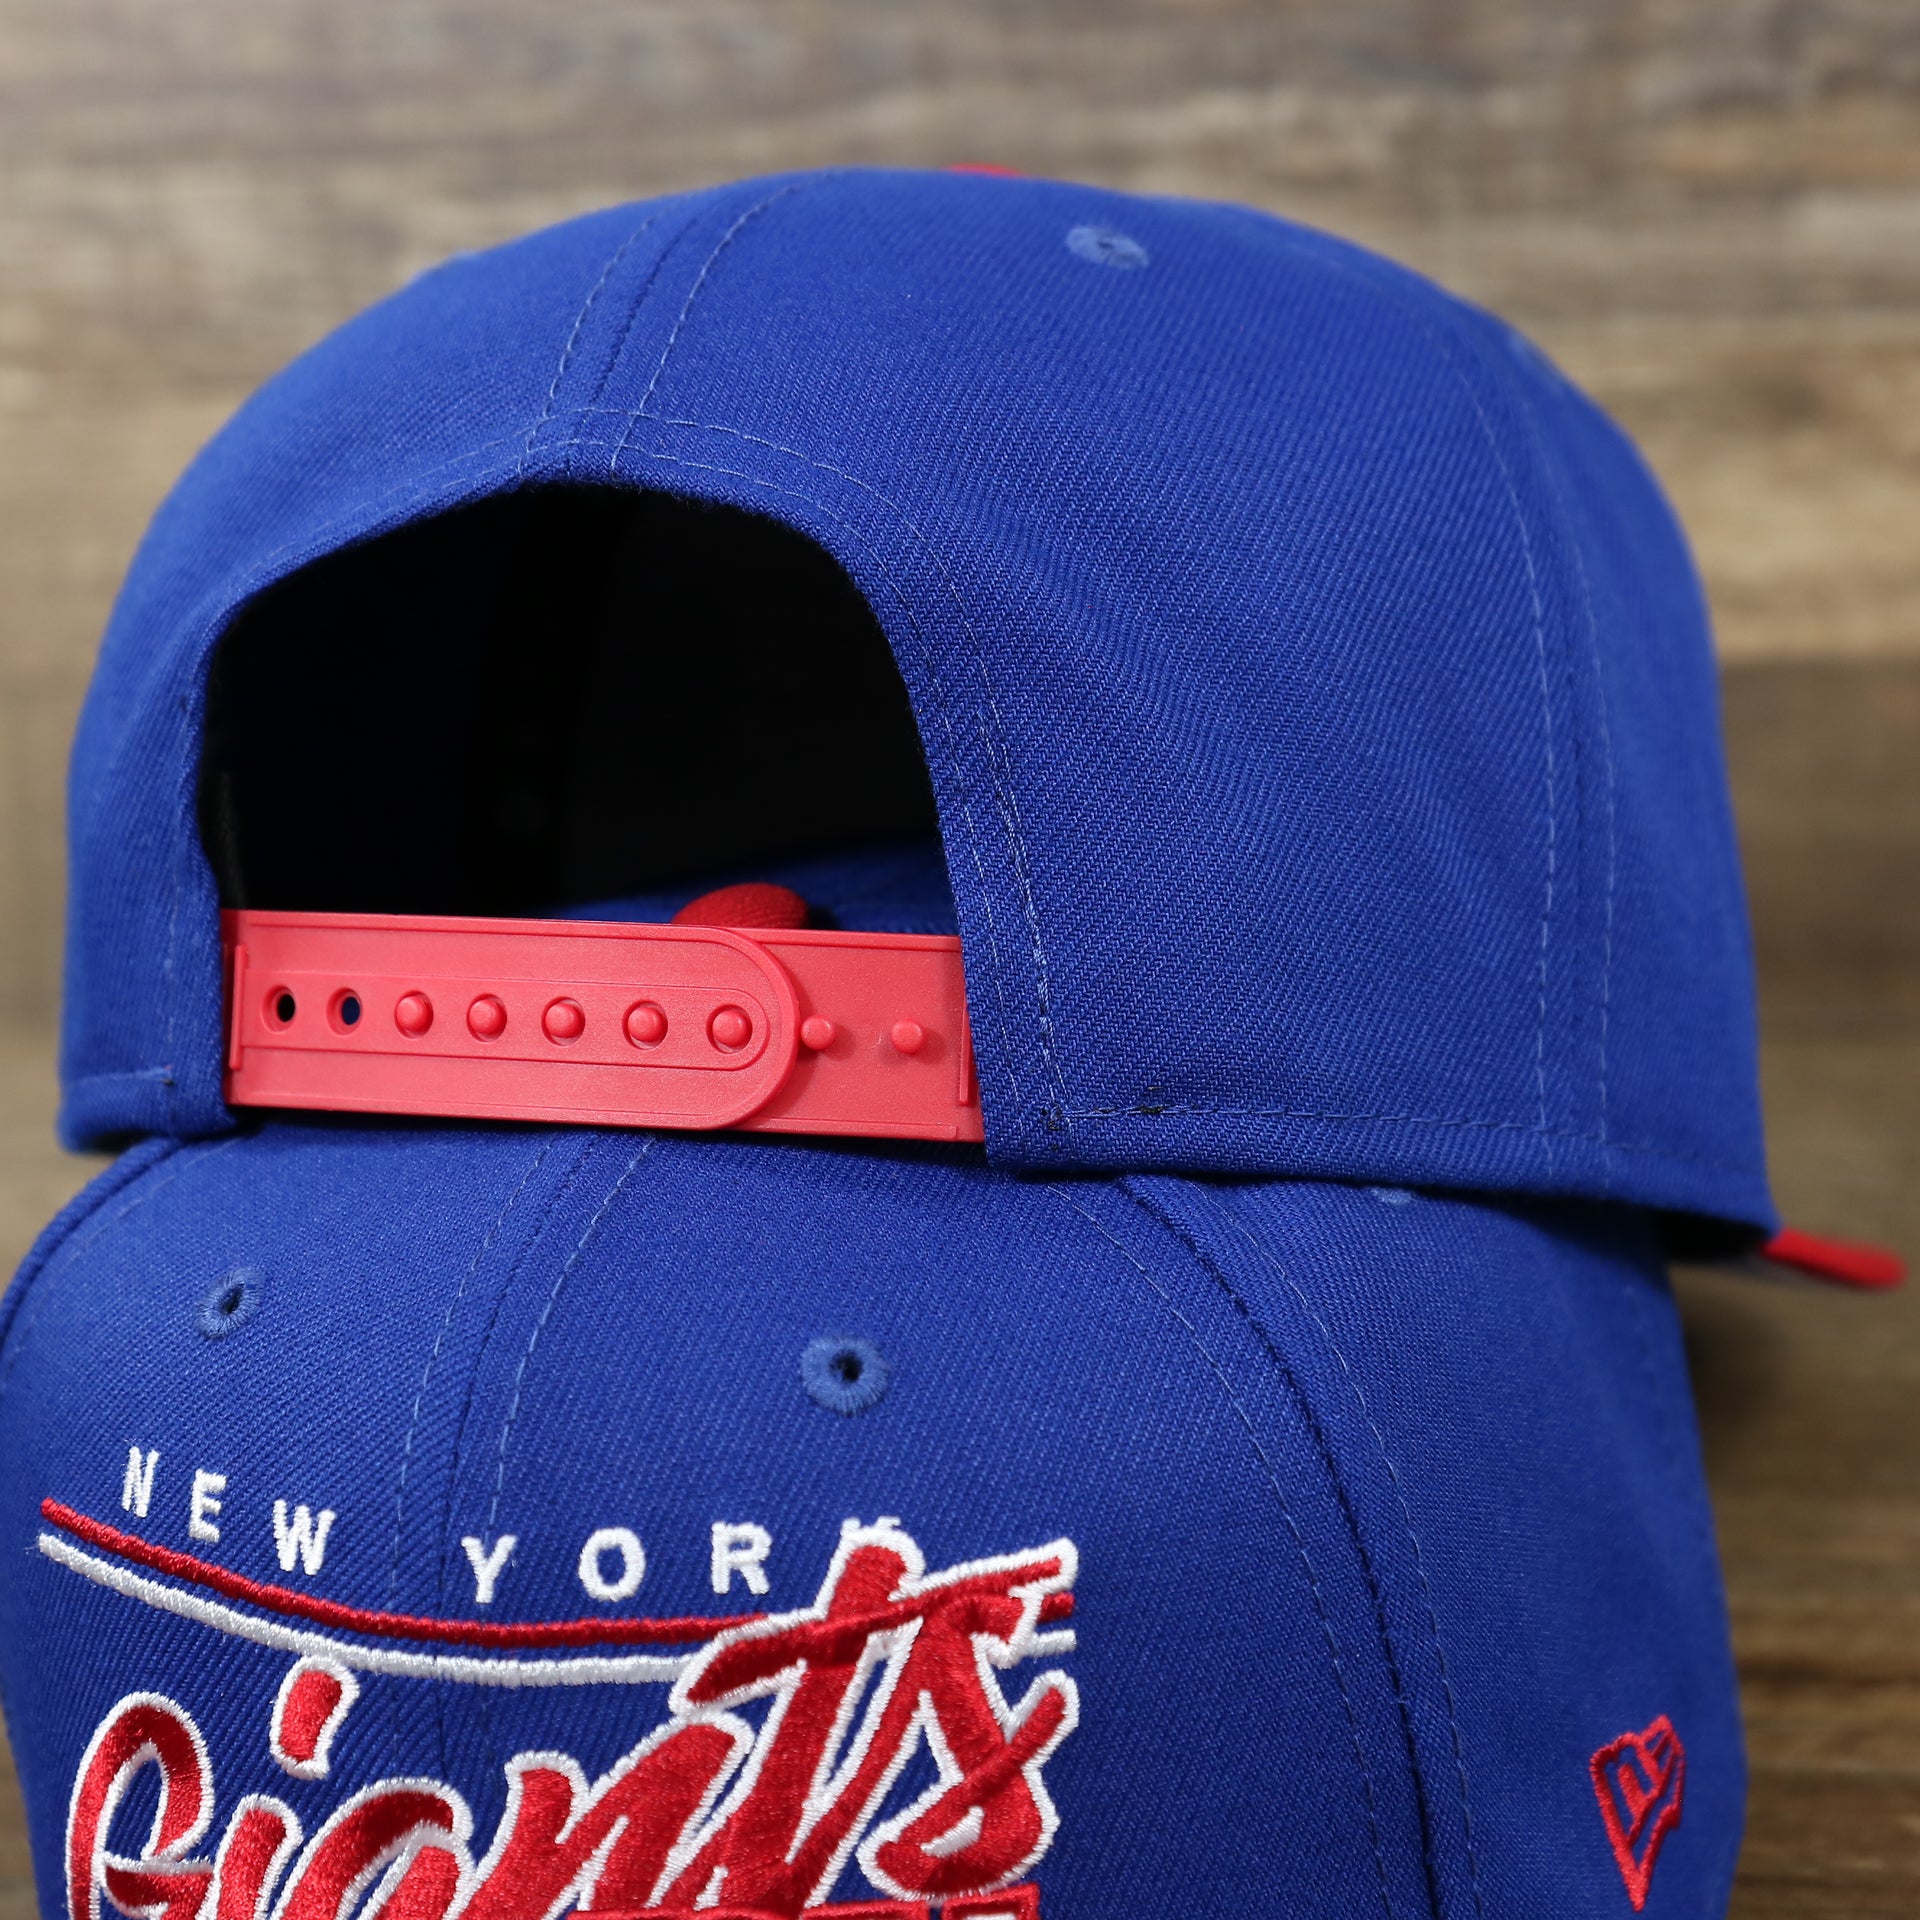 The backside of the New York Giants Team Script Gray Bottom 9Fifty Snapback | Royal Blue And Red Snap Cap